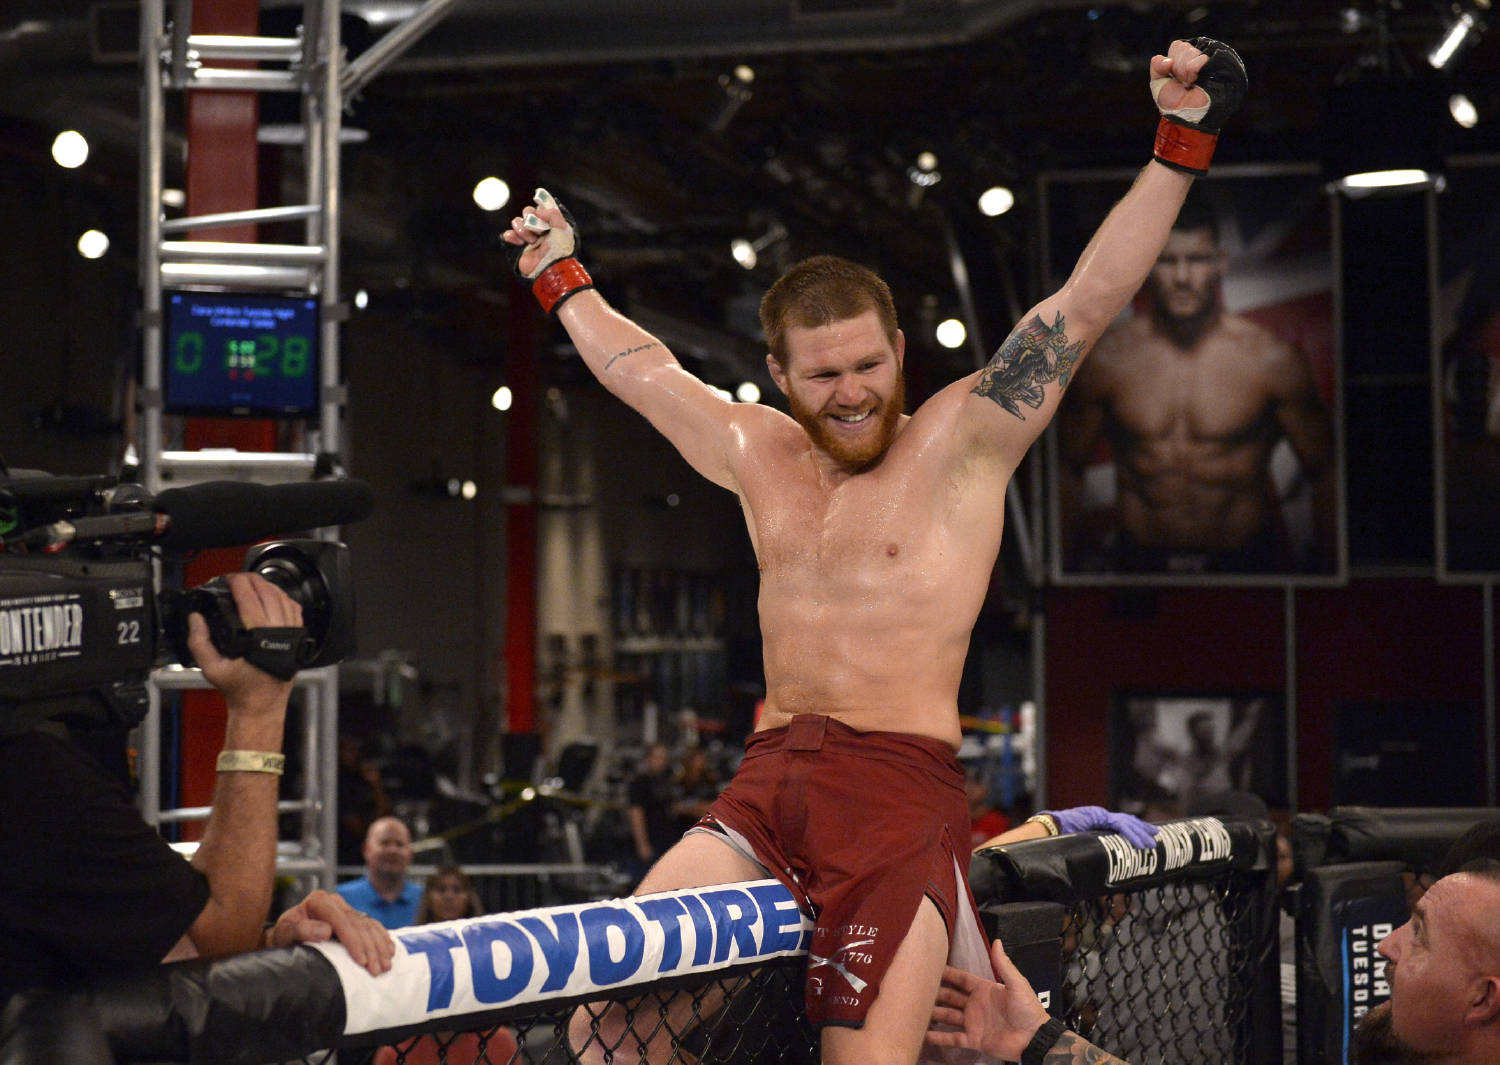 Matt Frevola celebrates after defeating Luke Flores by submission in their lightweight bout during Dana White's Tuesday Night Contender Series at the TUF Gym on August 29, 2017 in Las Vegas, Nevada. (Photo by Brandon Magnus/DWTNCS)